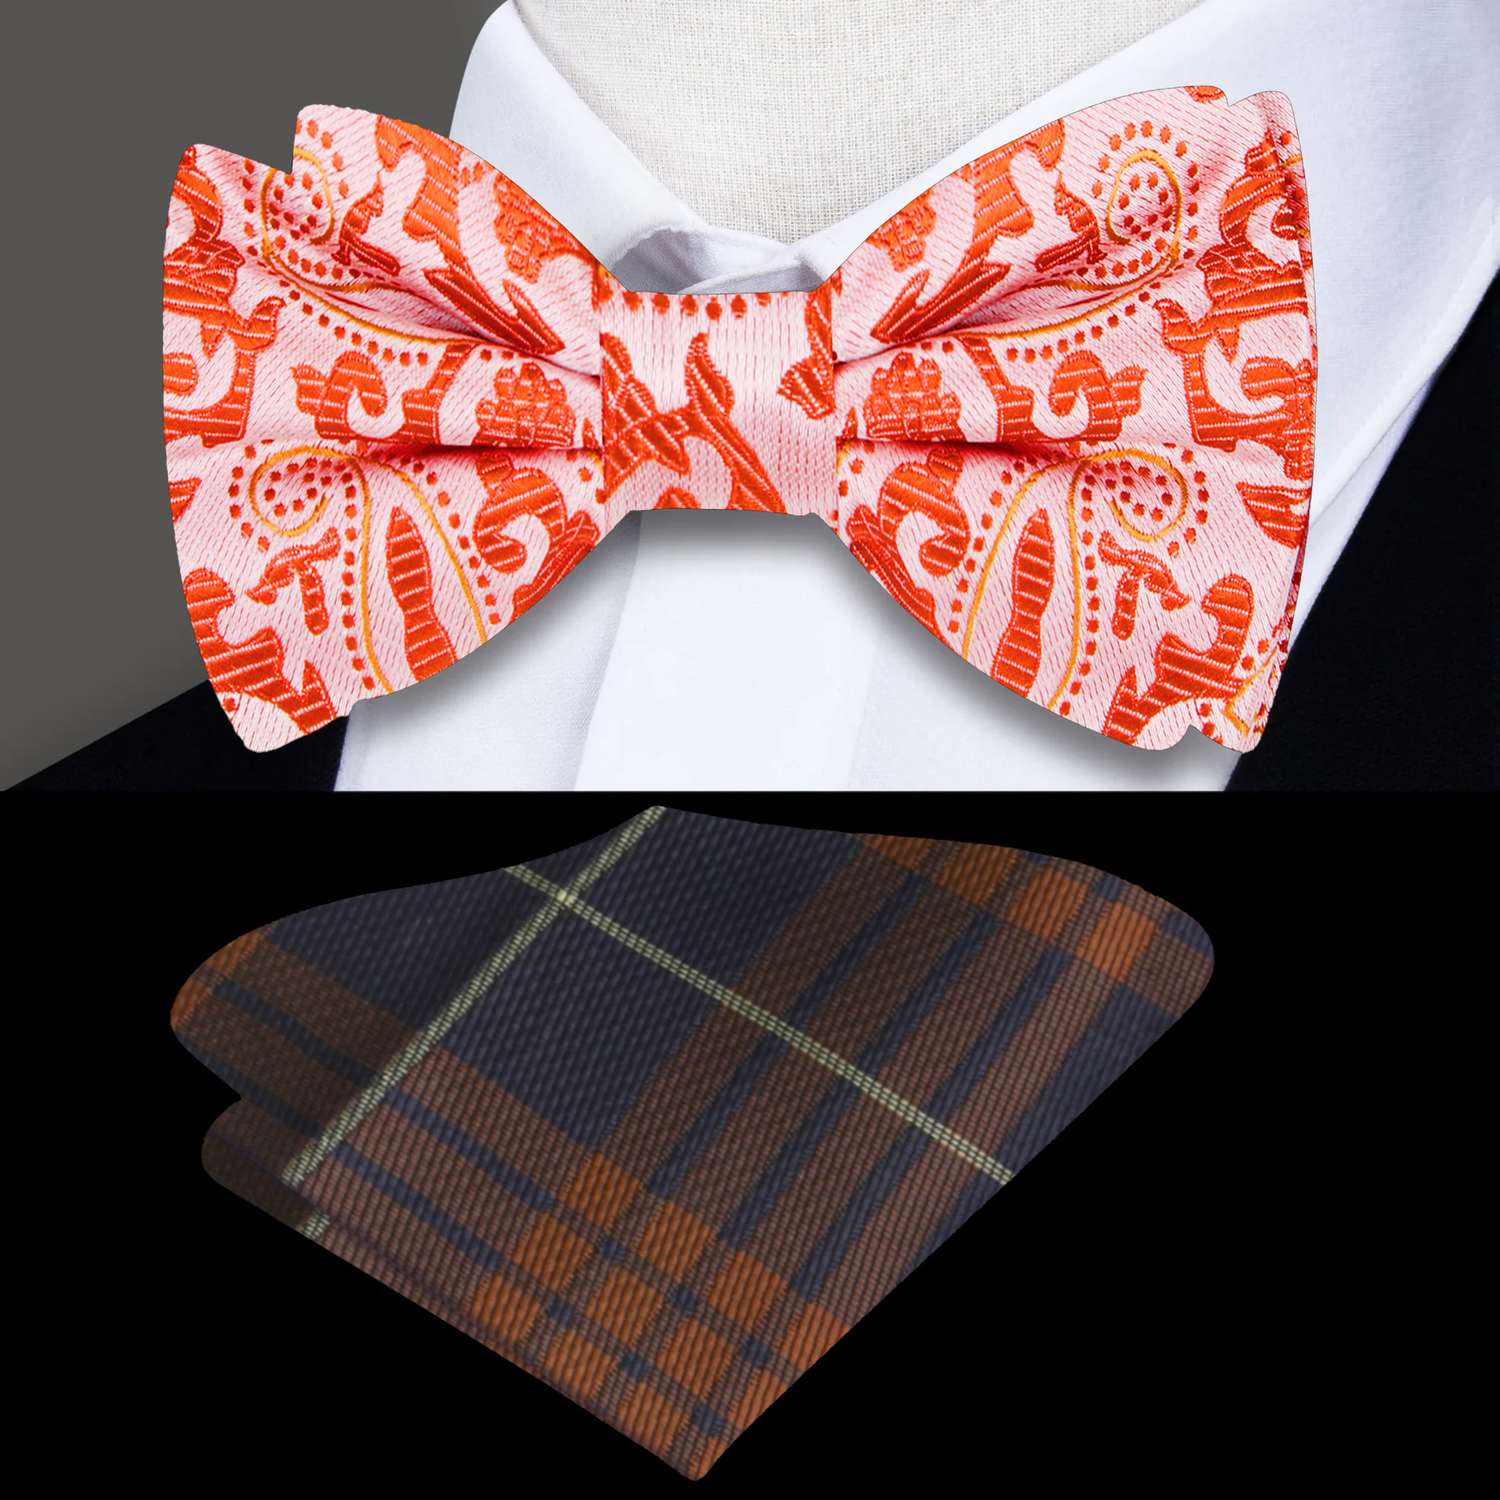 A Coral, Orange Paisley Pattern Silk Bow Tie, Plaid Matching Pocket Square